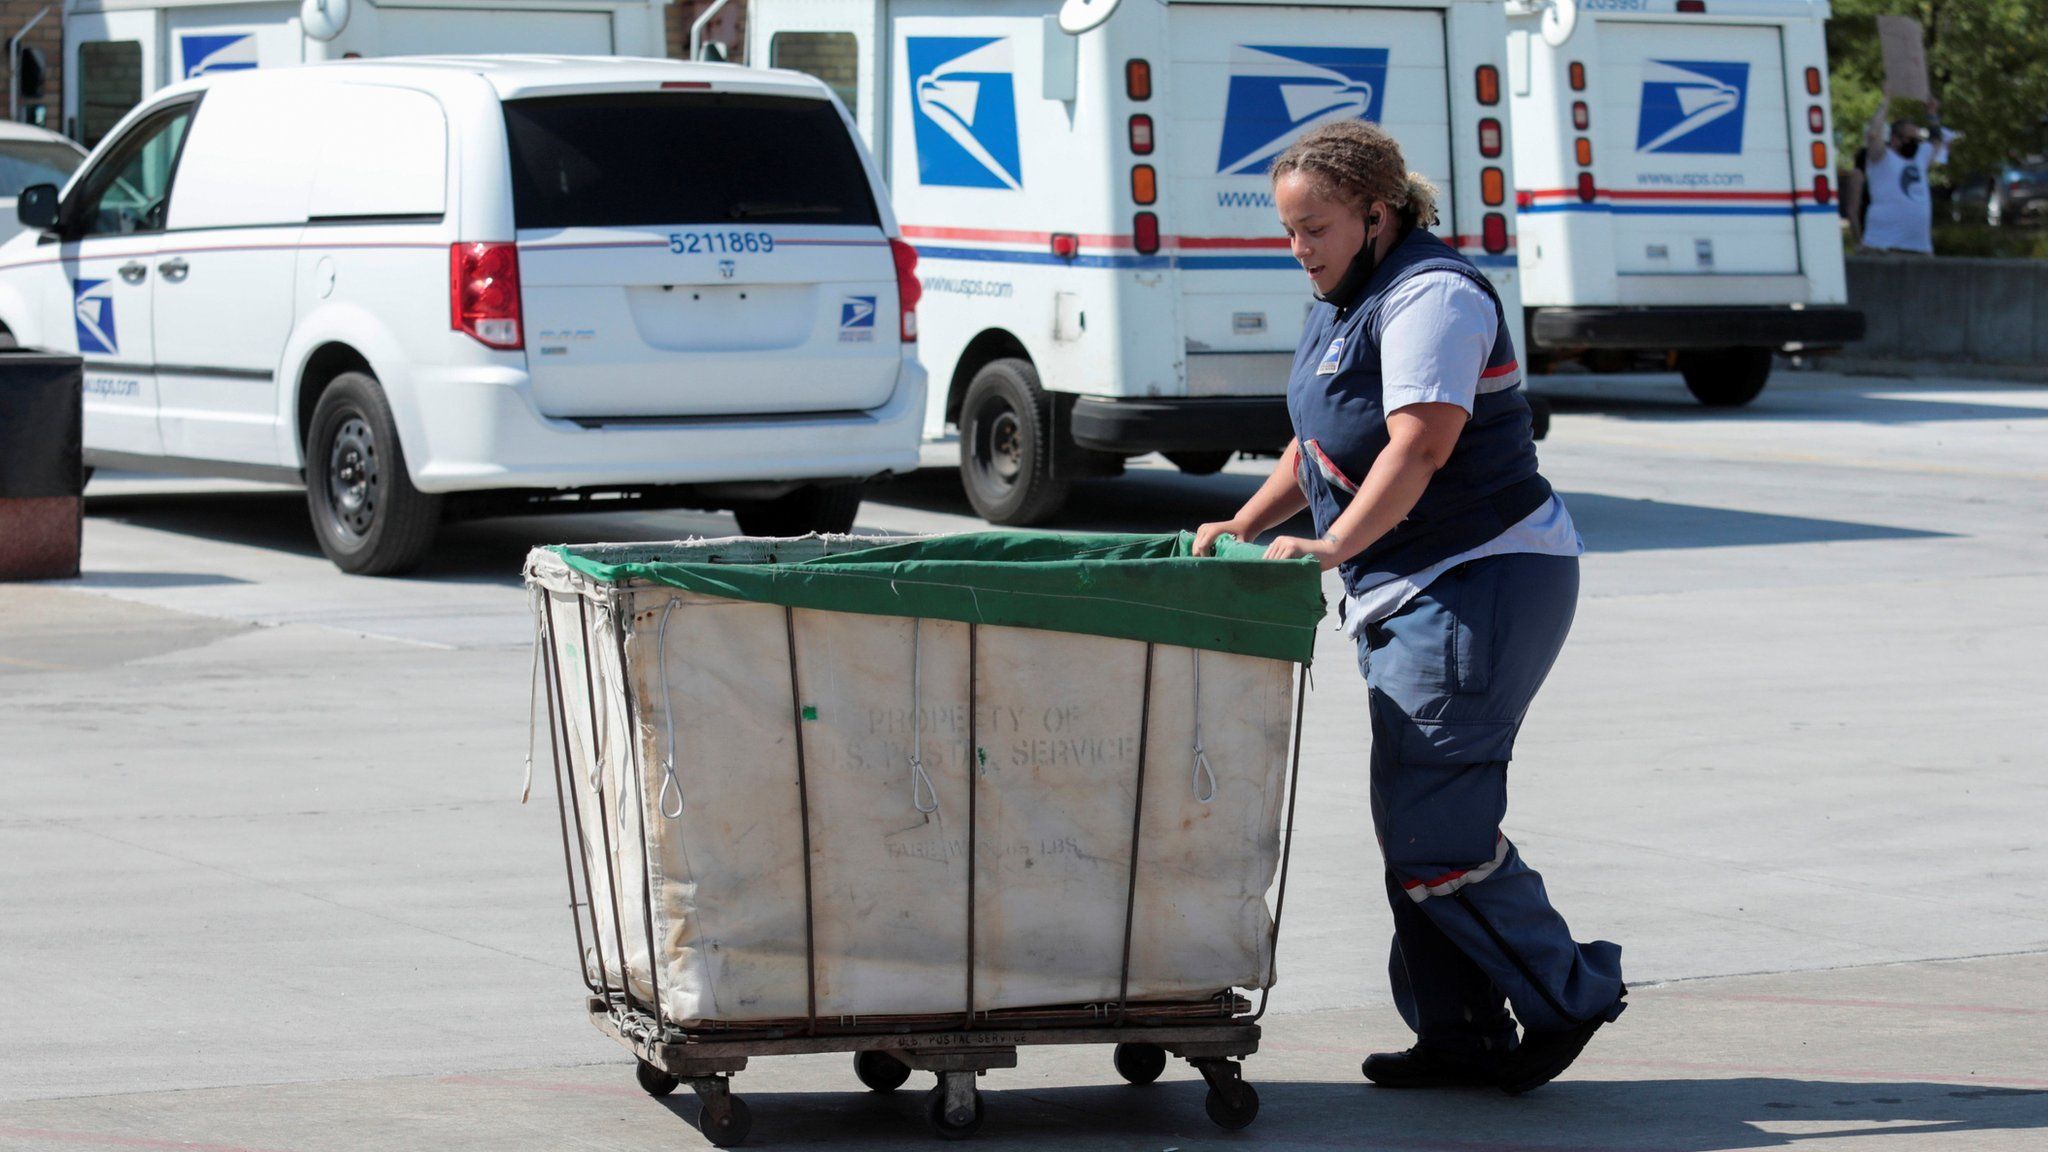 US Postal Service worker pushes a mail bin outside a post office in Royal Oak, Michigan (22 August 2020)